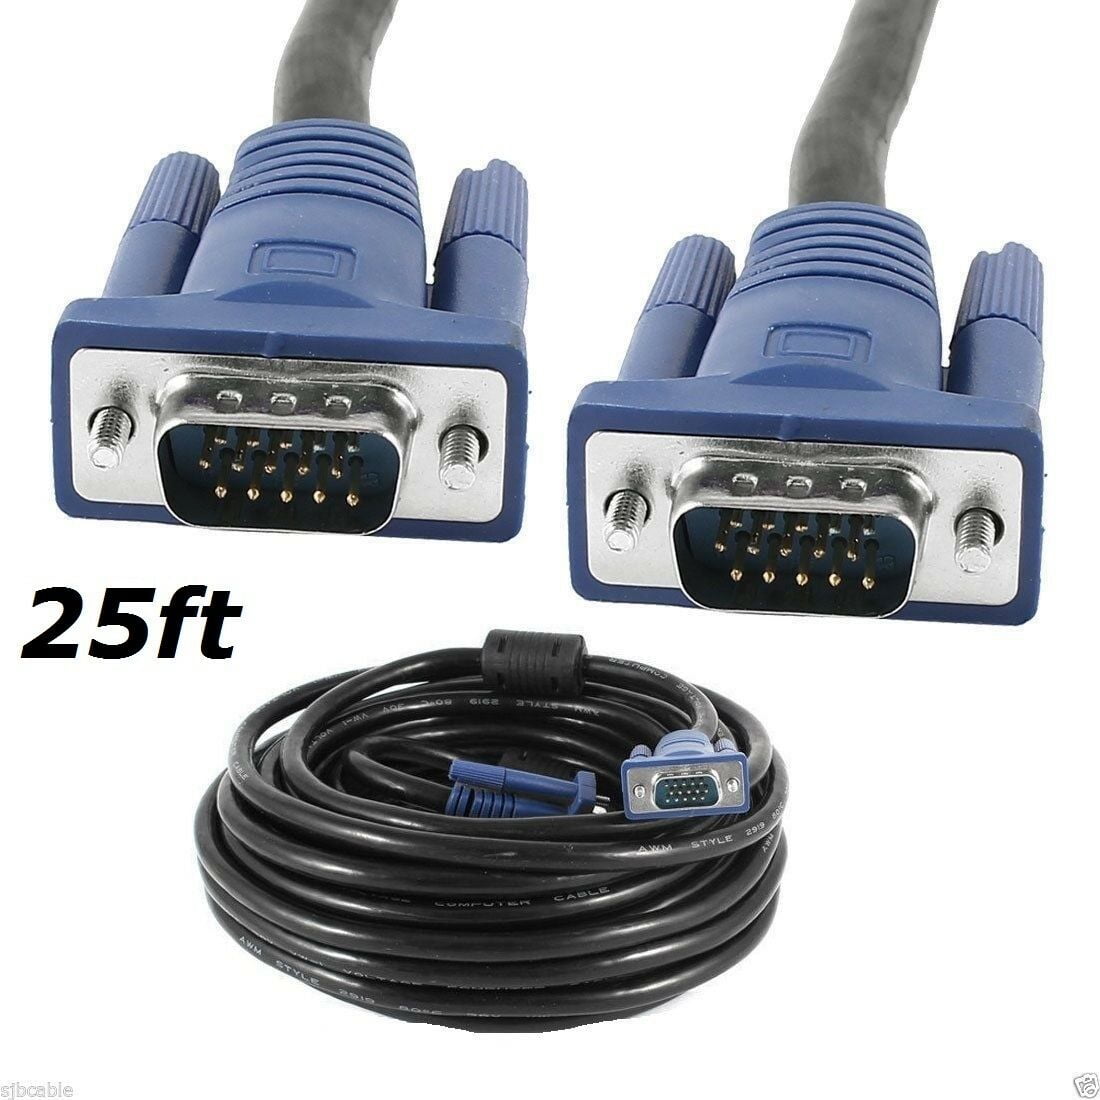 SUPER VGA SVGA CABLE CORD MALE TO MALE 25FT FOR PC HDTV 